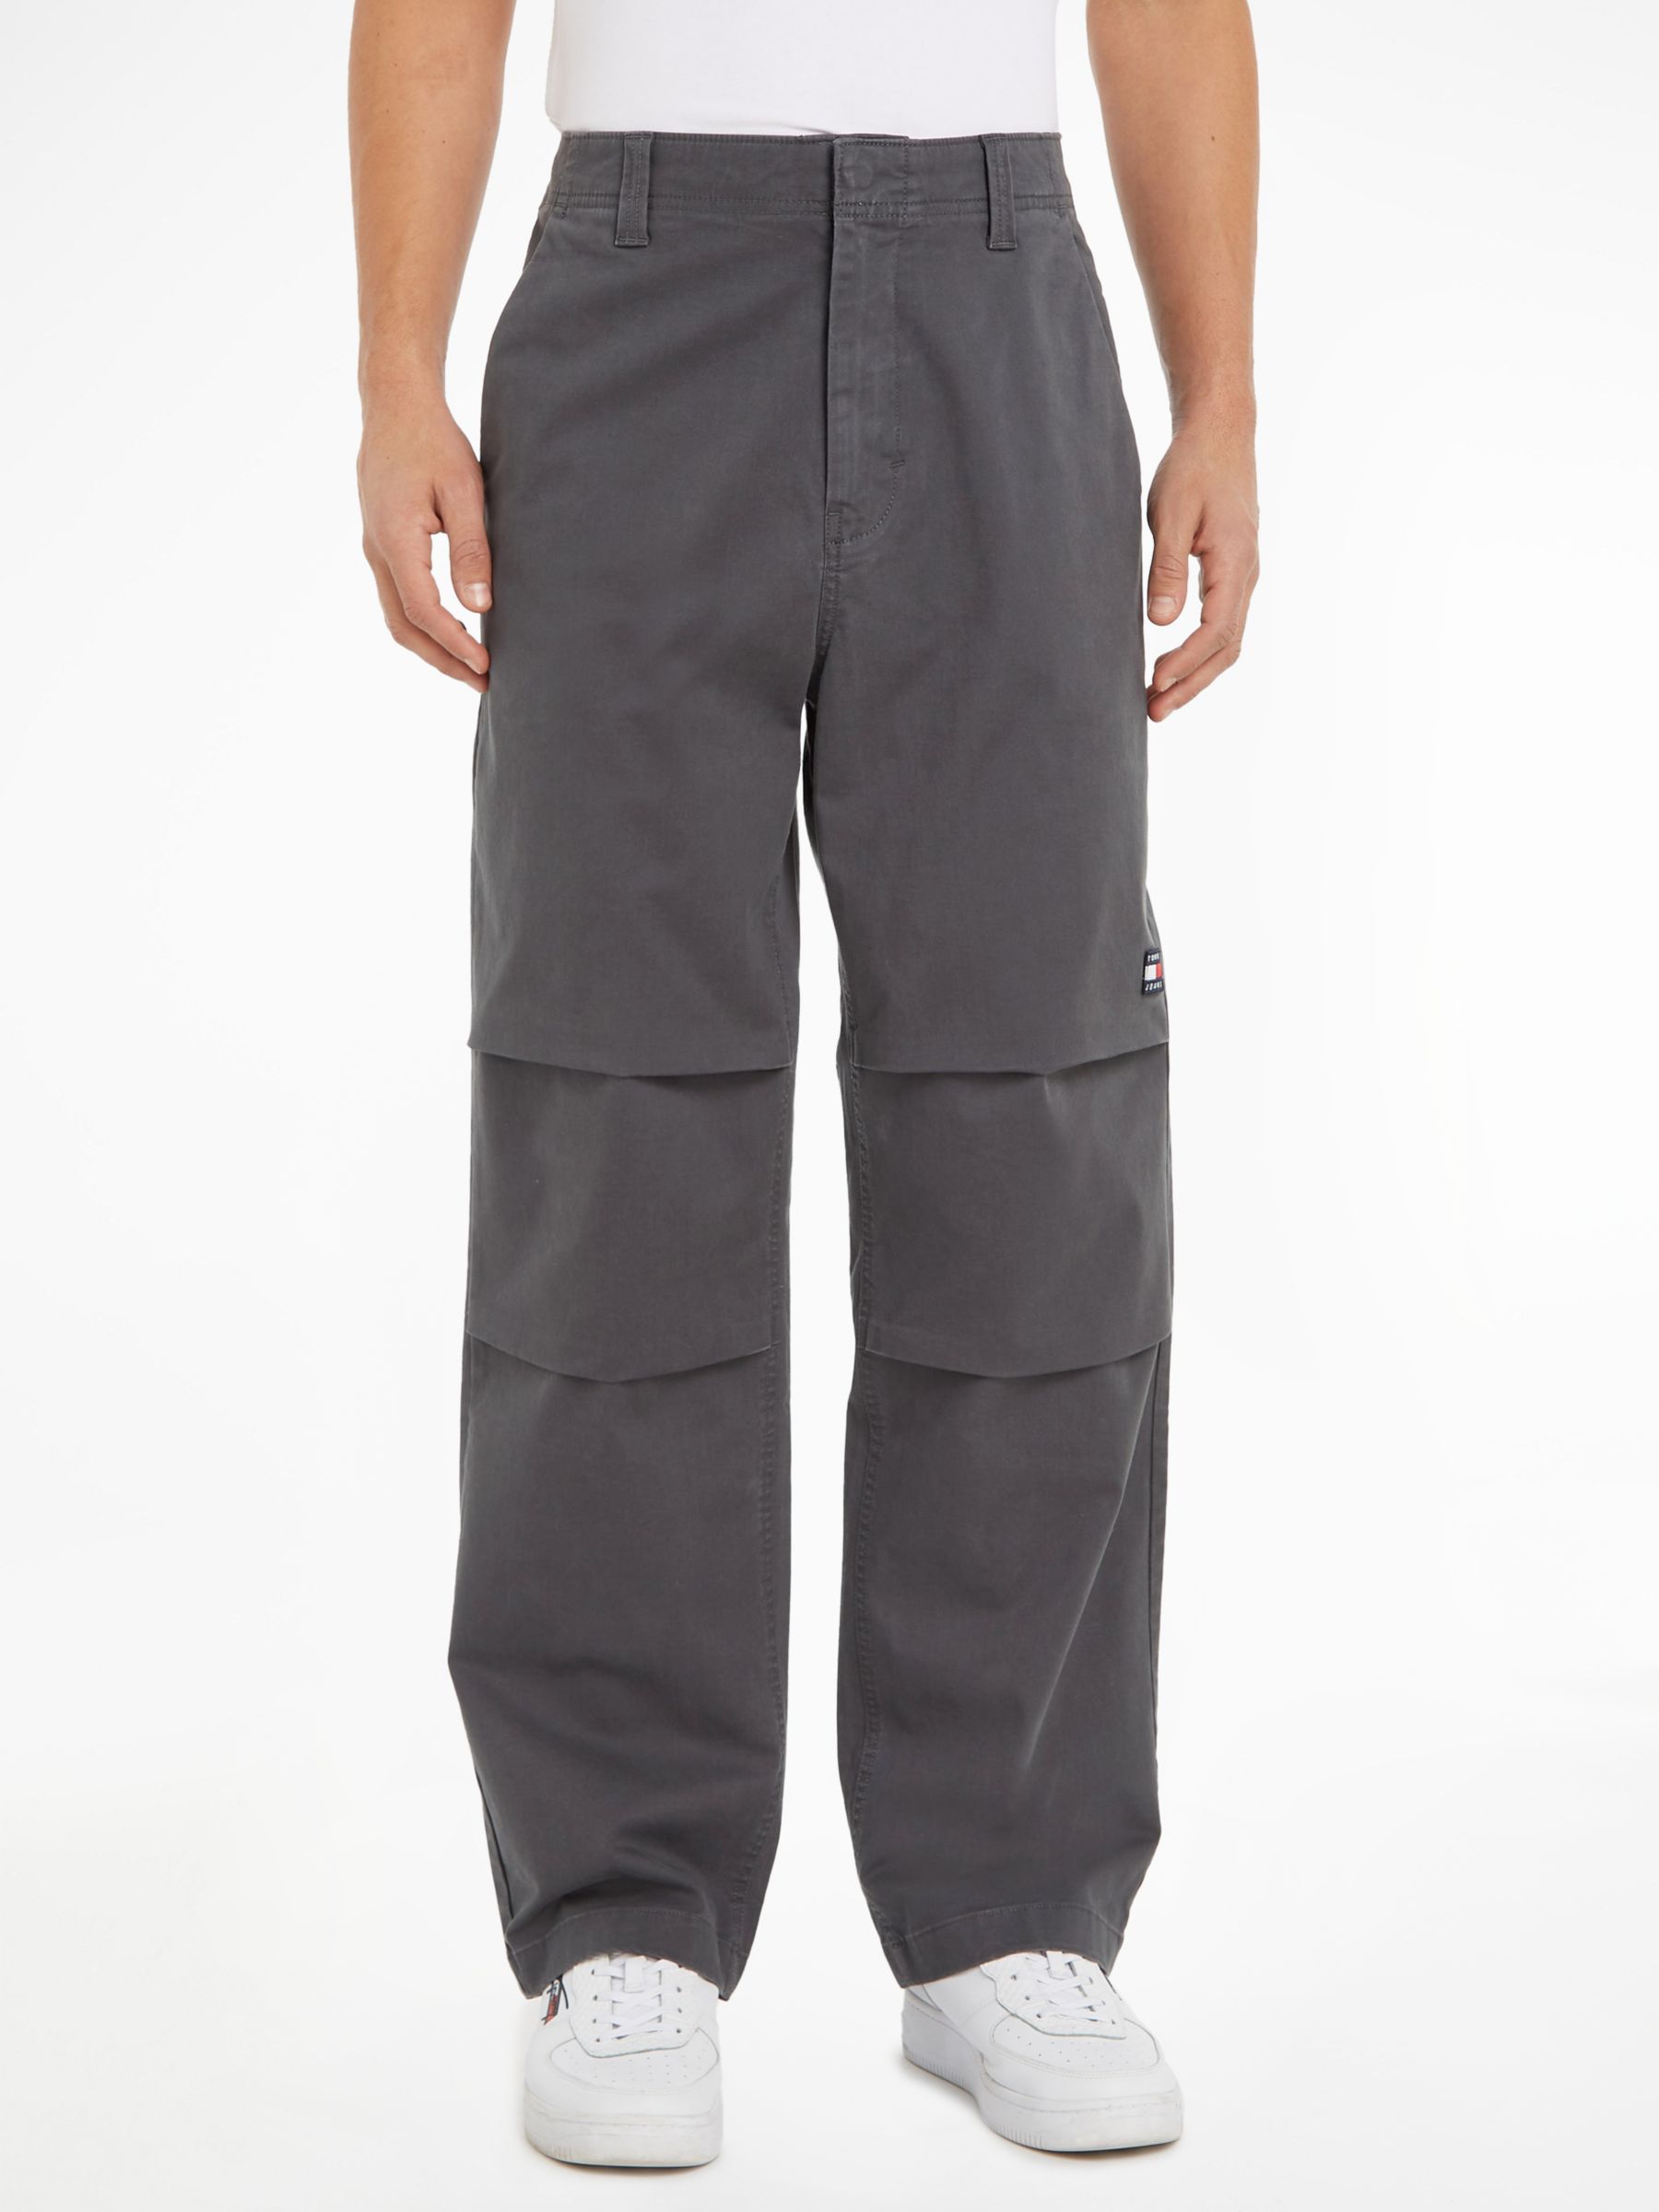 Tommy Jeans Aiden Baggy Chinos, Charcoal, 30R